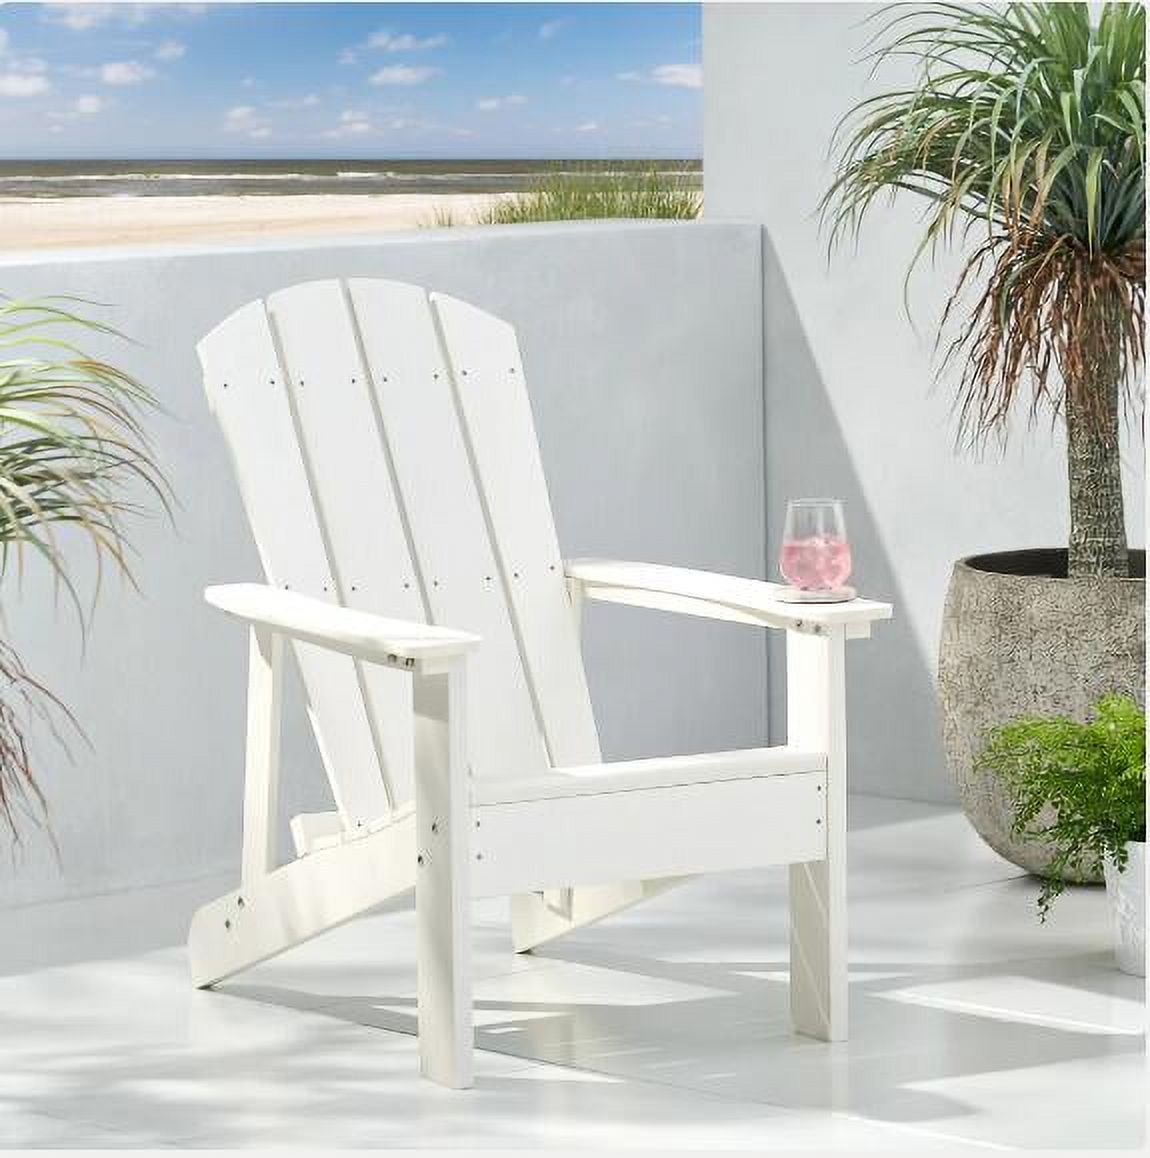 LANTRO JS Classic Pure White Outdoor Solid Wood Adirondack Chair Garden Lounge Chair - image 1 of 7